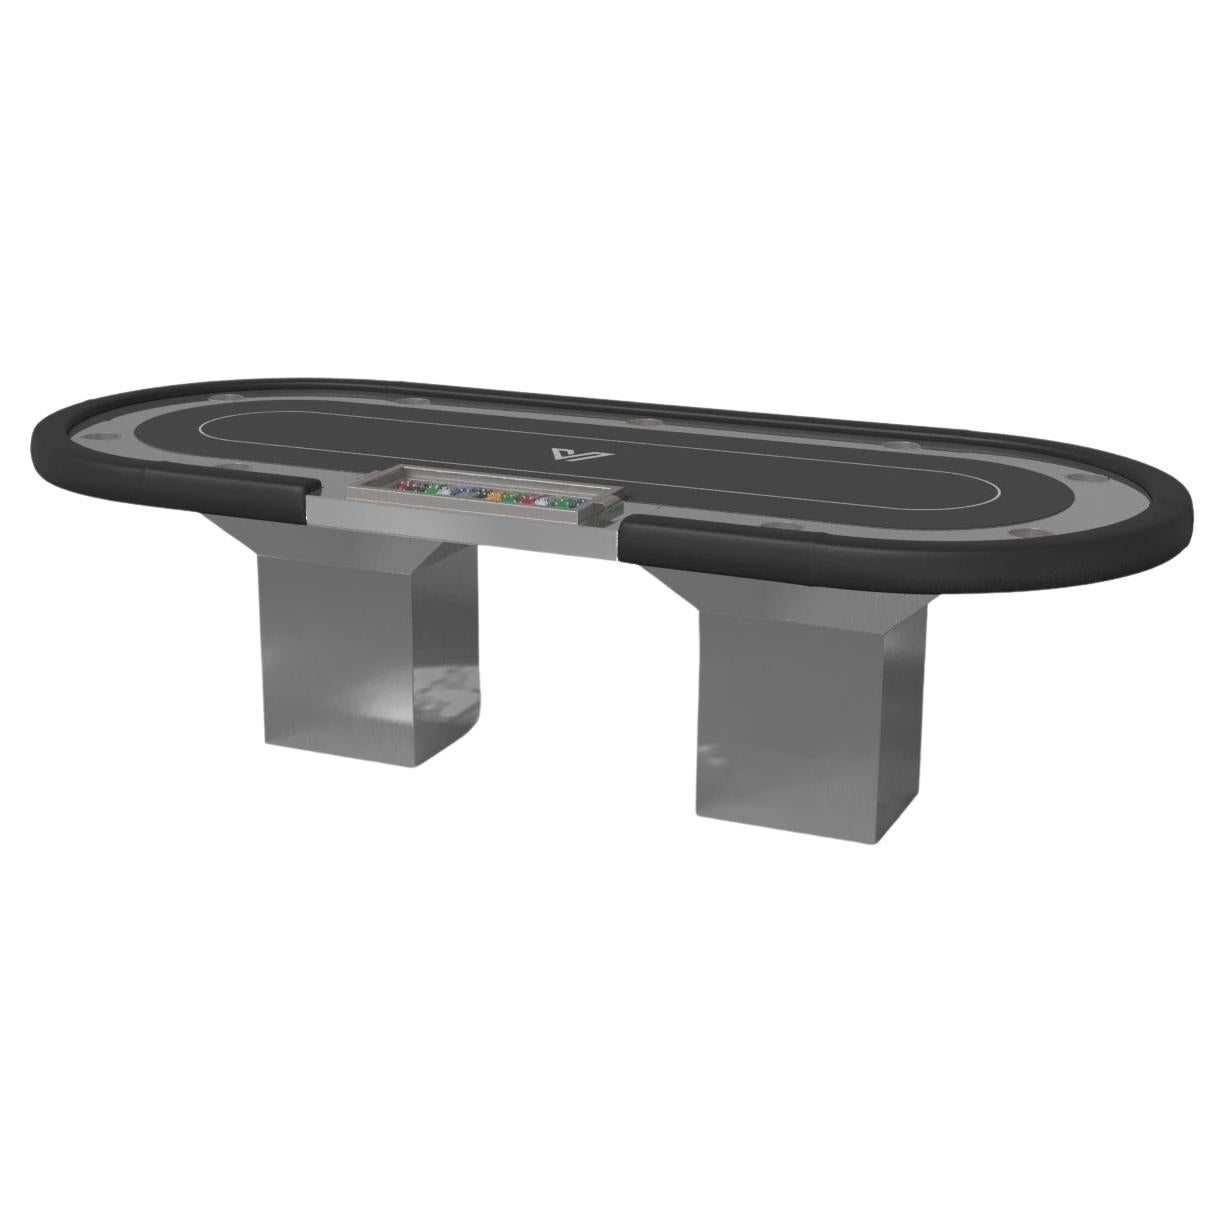 Elevate Customs Trestle Poker Tables / Stainless Steel Sheet Metal in 8'8" - USA